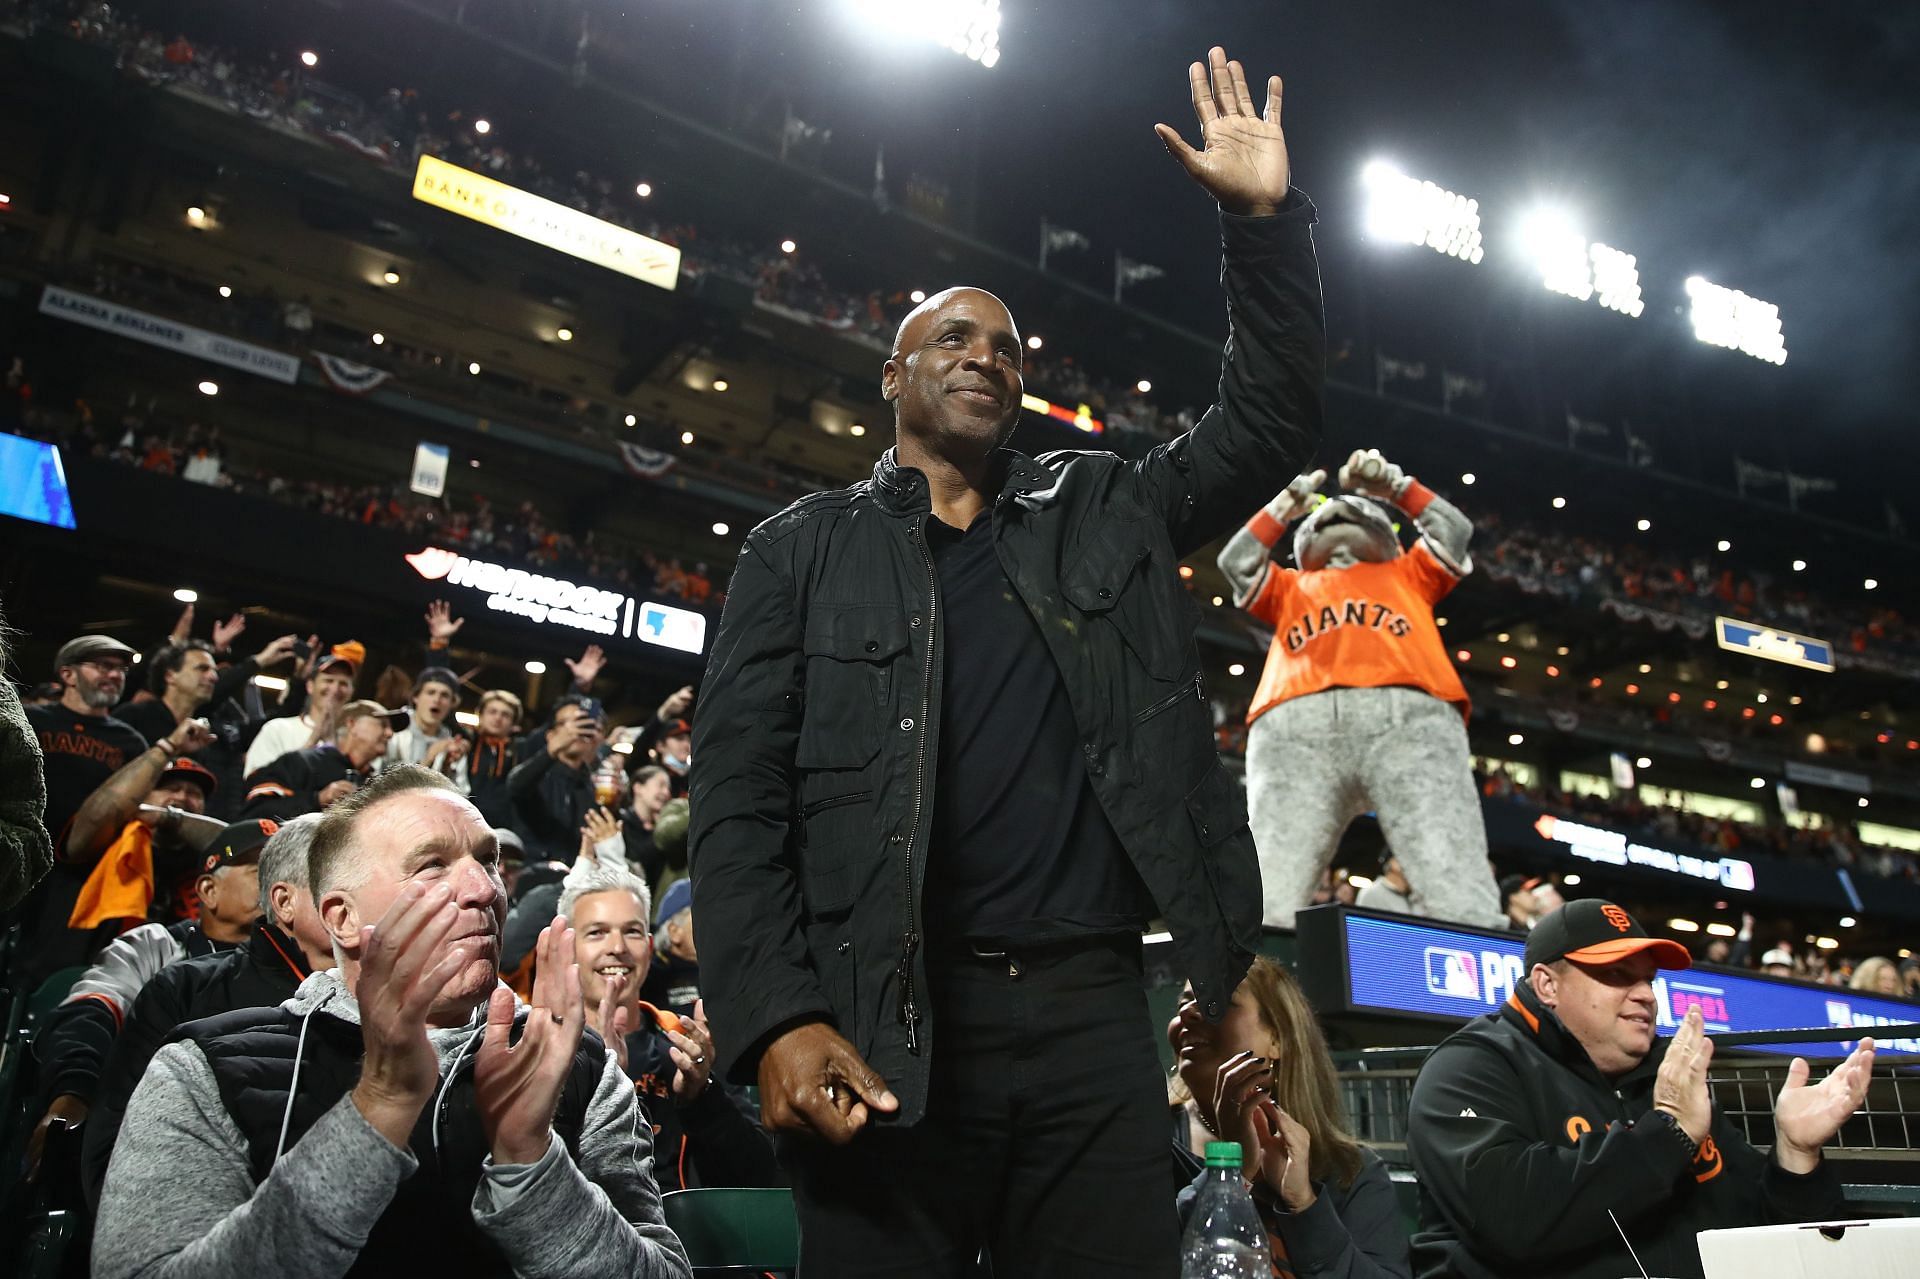 Barry Bonds hit 300 home runs for the Giants